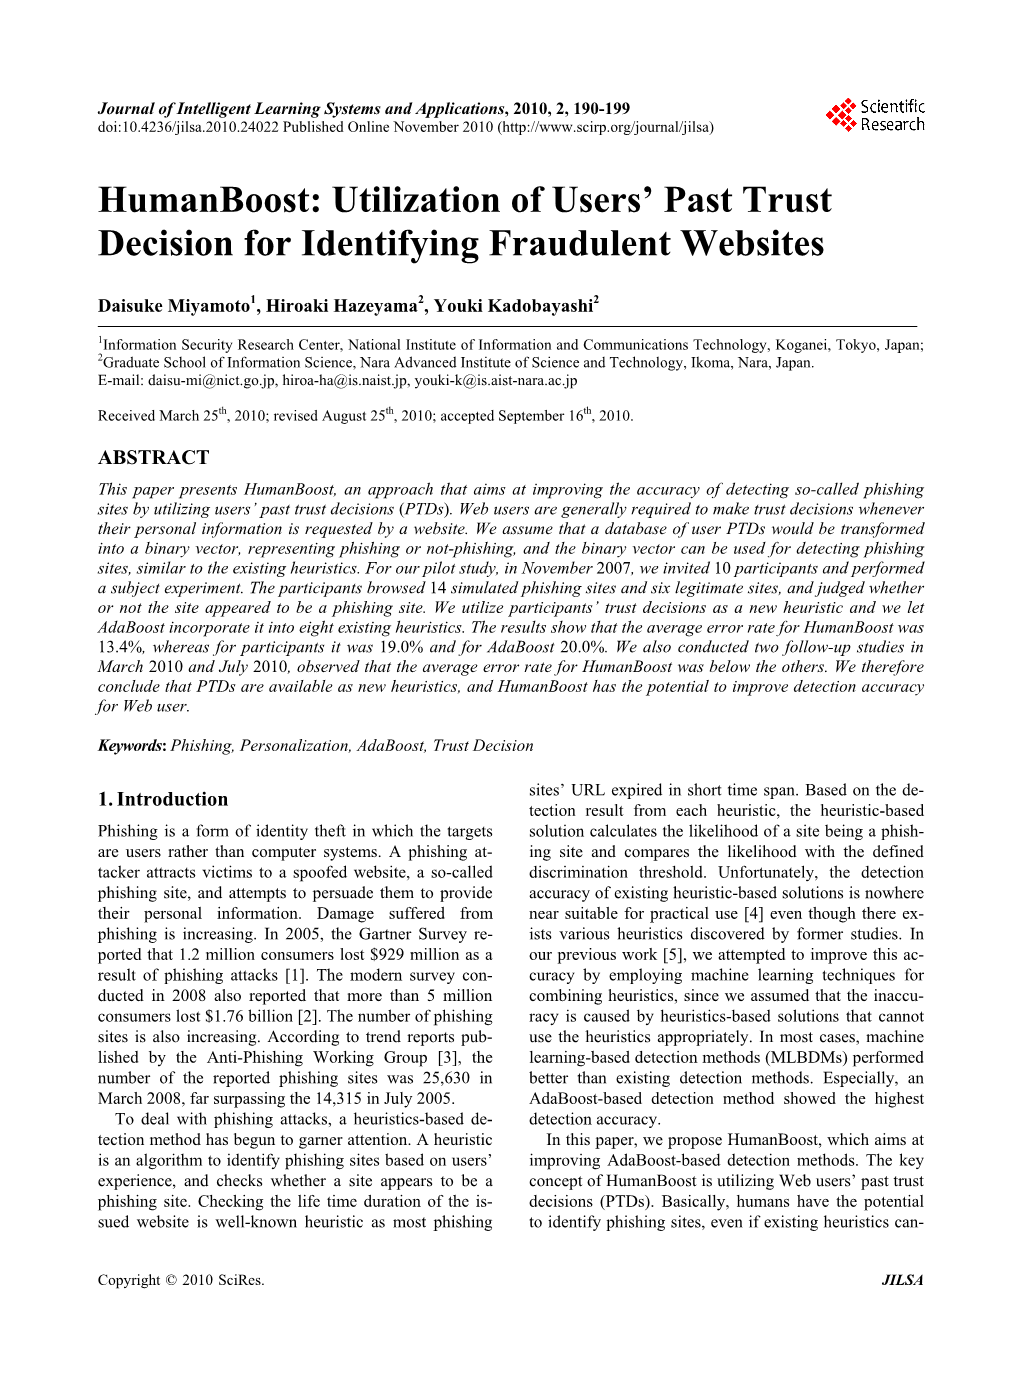 Utilization of Users' Past Trust Decision for Identifying Fraudulent